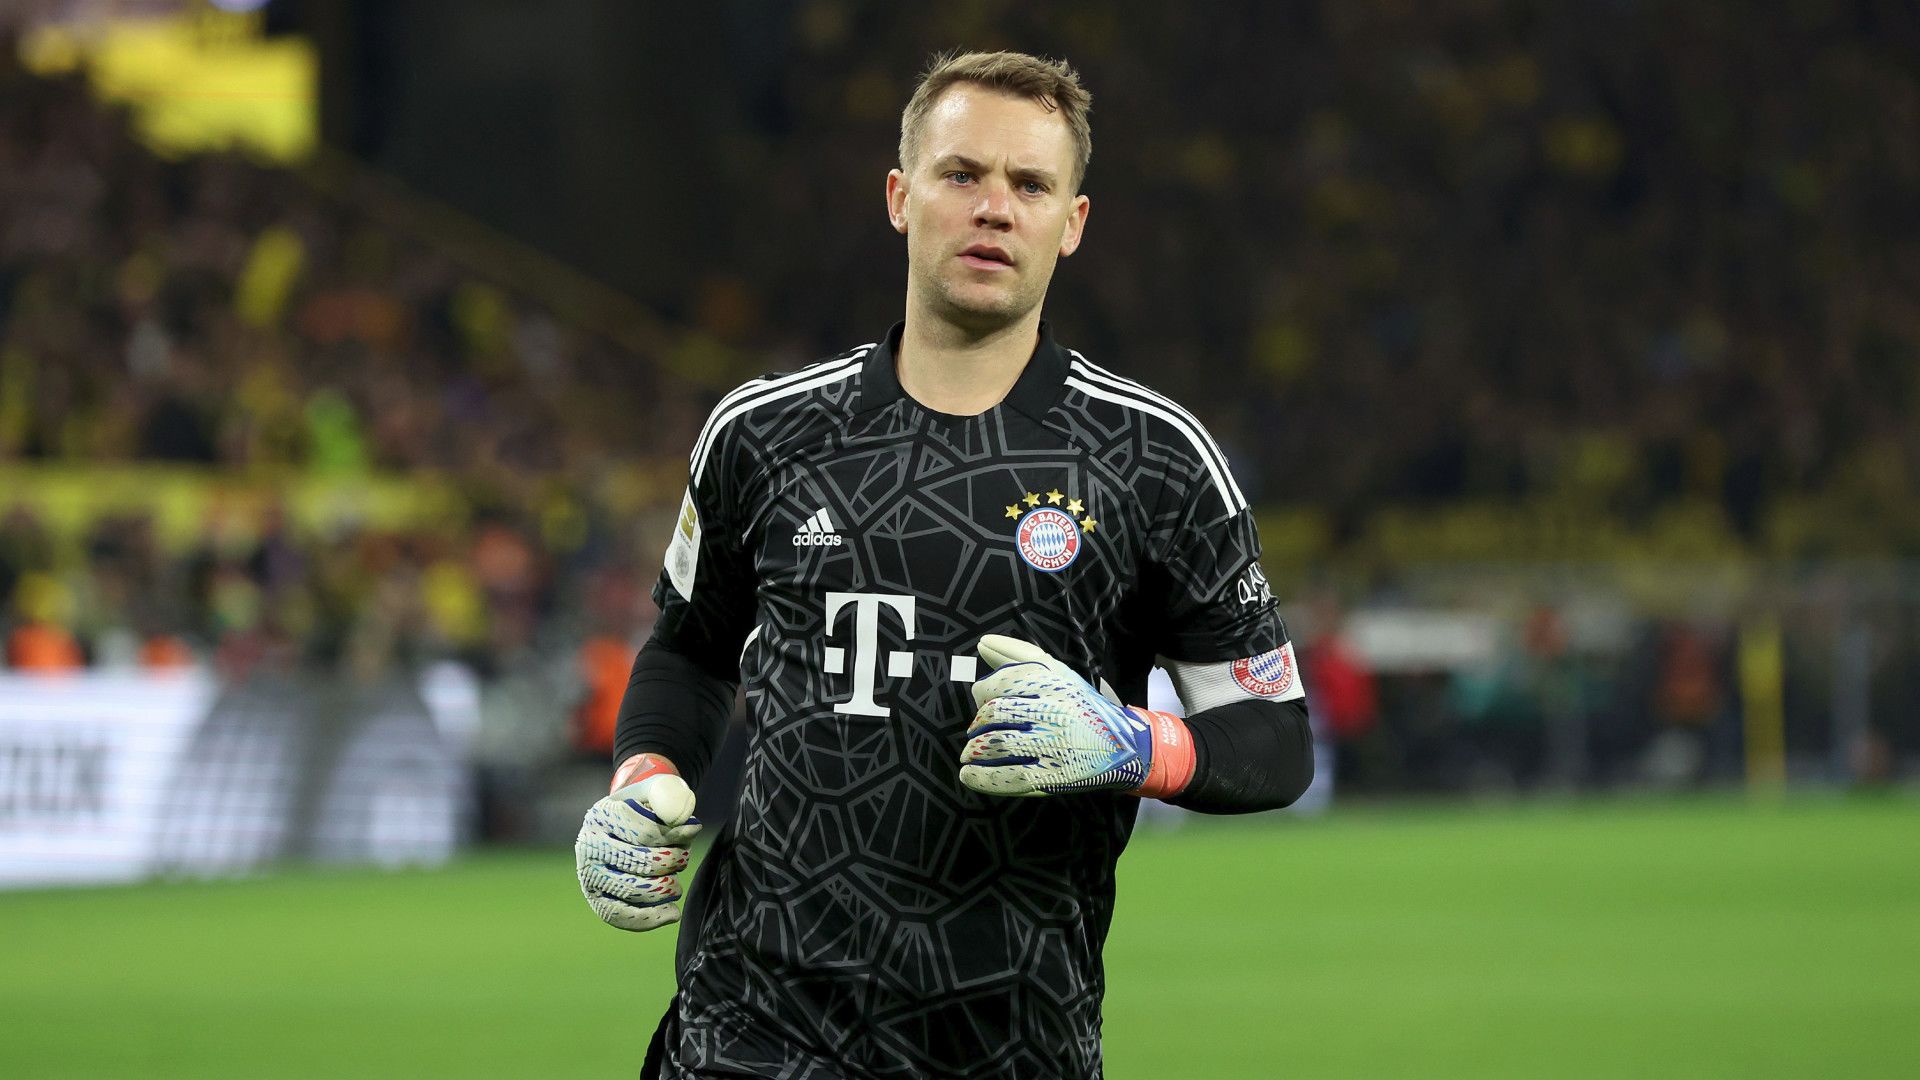 Neuer speaks about the pressure on the German national team after their loss to Japan at 2022 World Cup